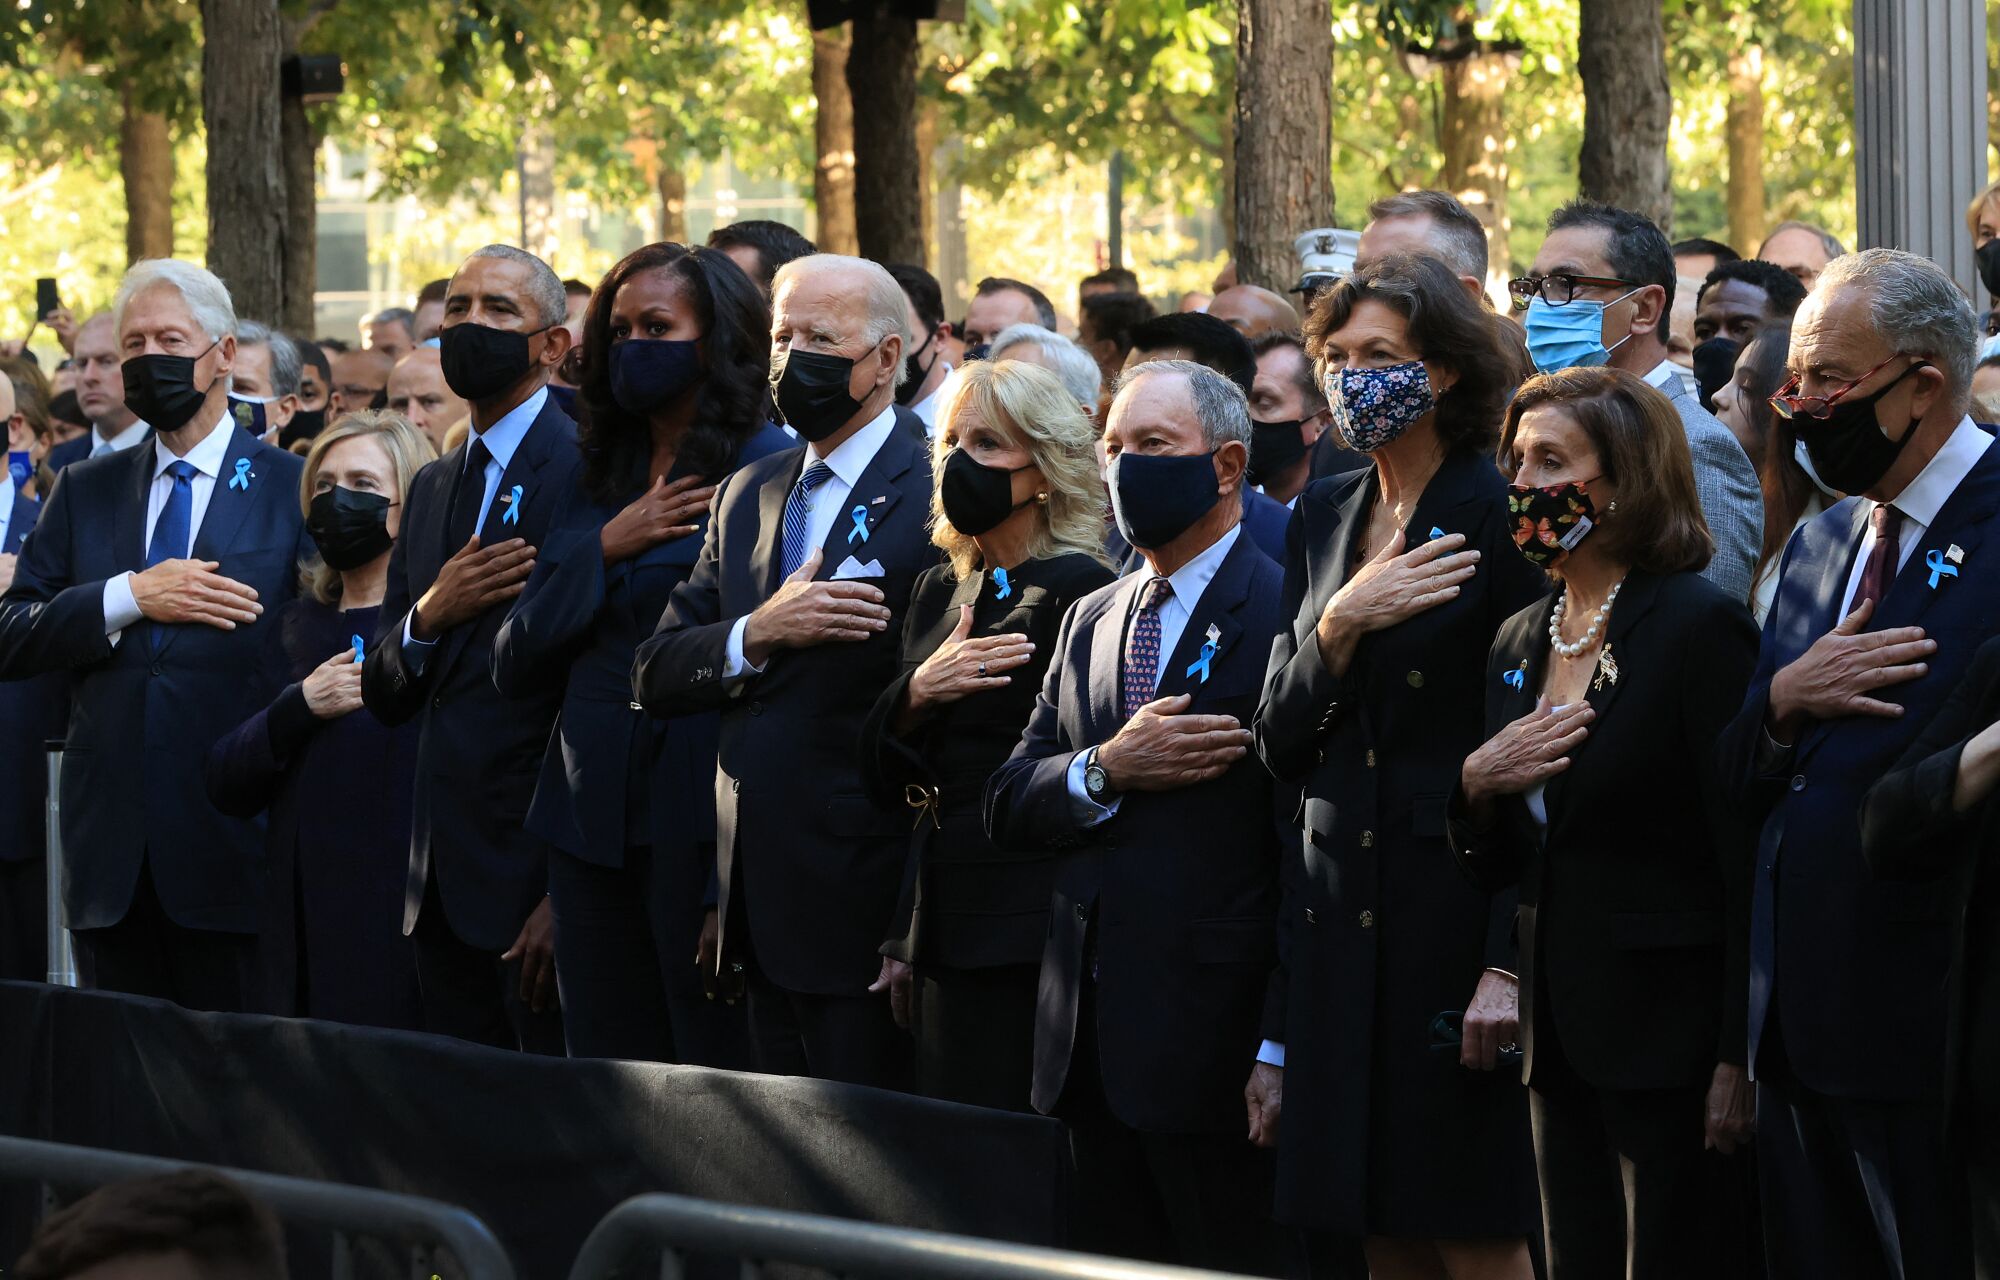 Current and former politcal leaders place their hands on their hearts and stand for the national anthem in New York City.